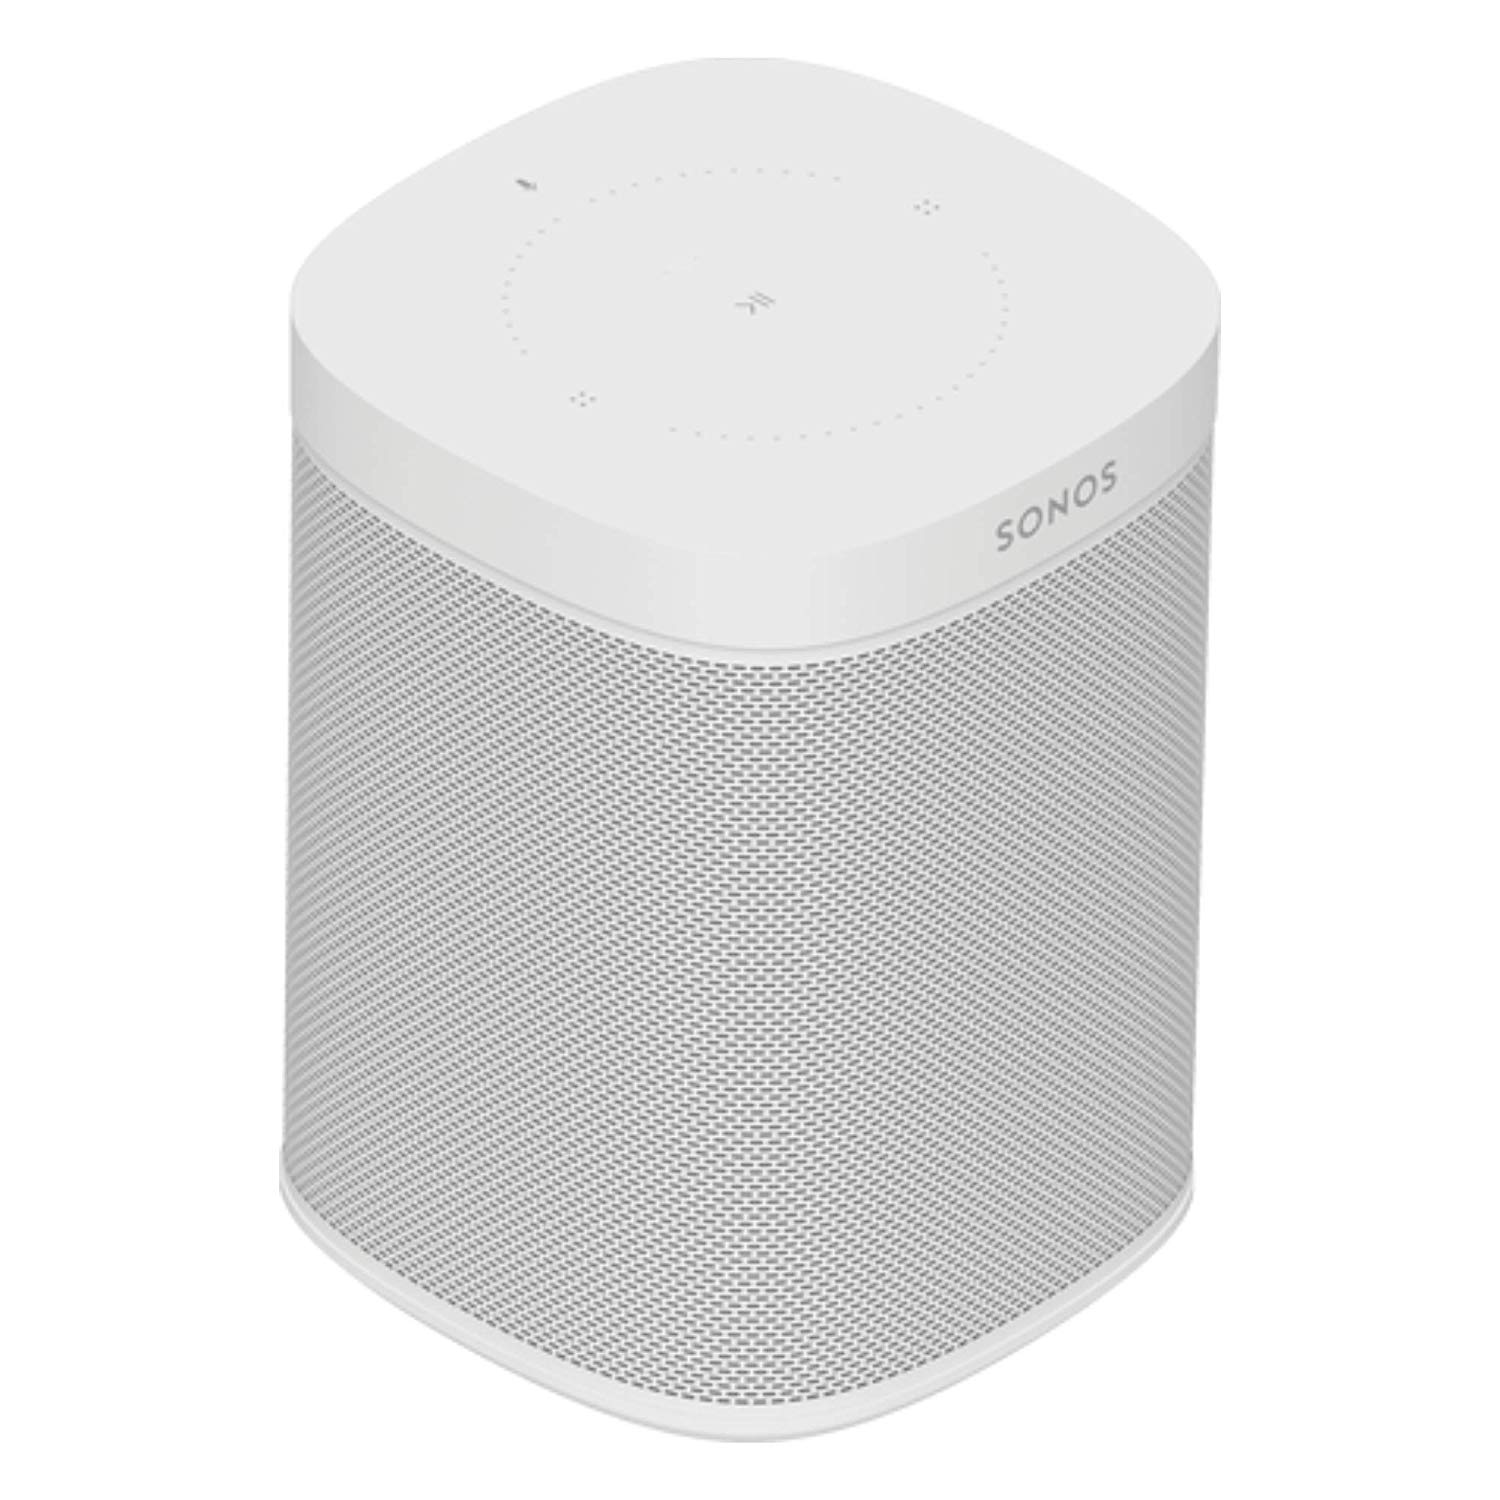 ONE-SL | Wireless streaming music speaker with Apple® AirPlay® 2 (White)